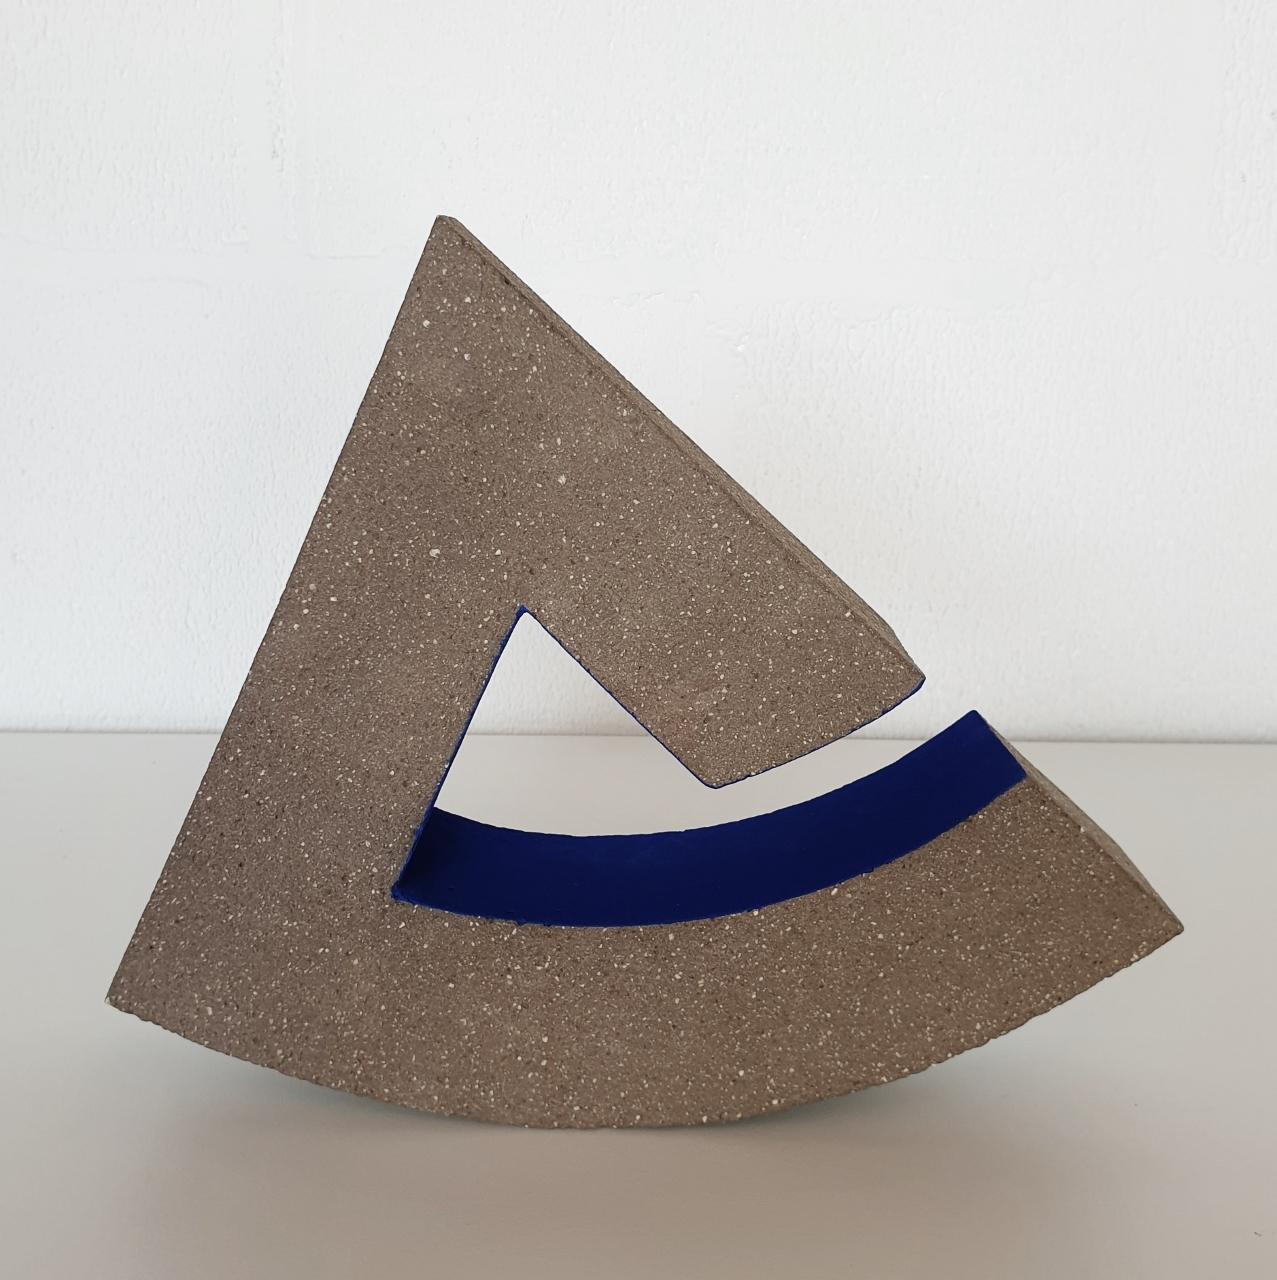 Untitled - contemporary modern abstract geometric ceramic sculpture object - Contemporary Sculpture by Let de Kok